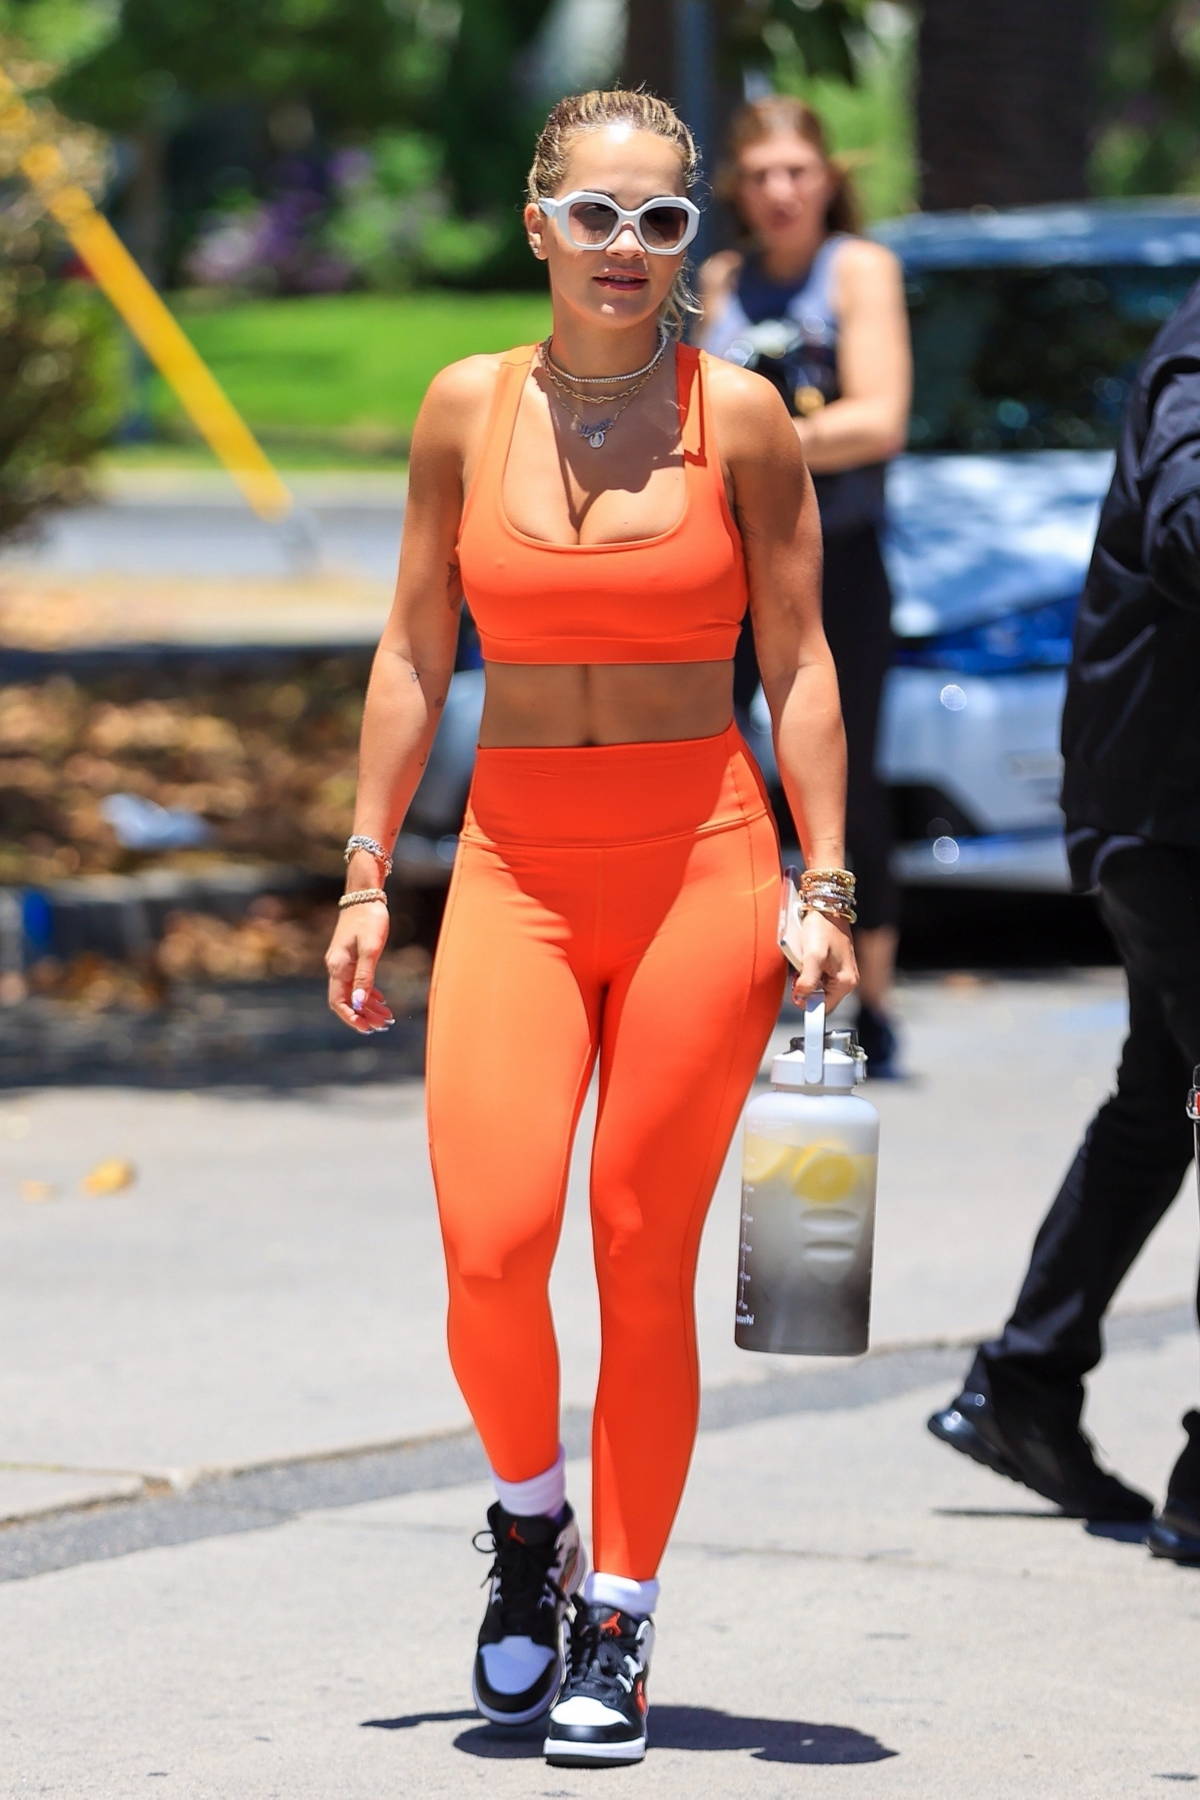 Rita Ora shows off her toned physique in a bright orange outfit while  heading to a